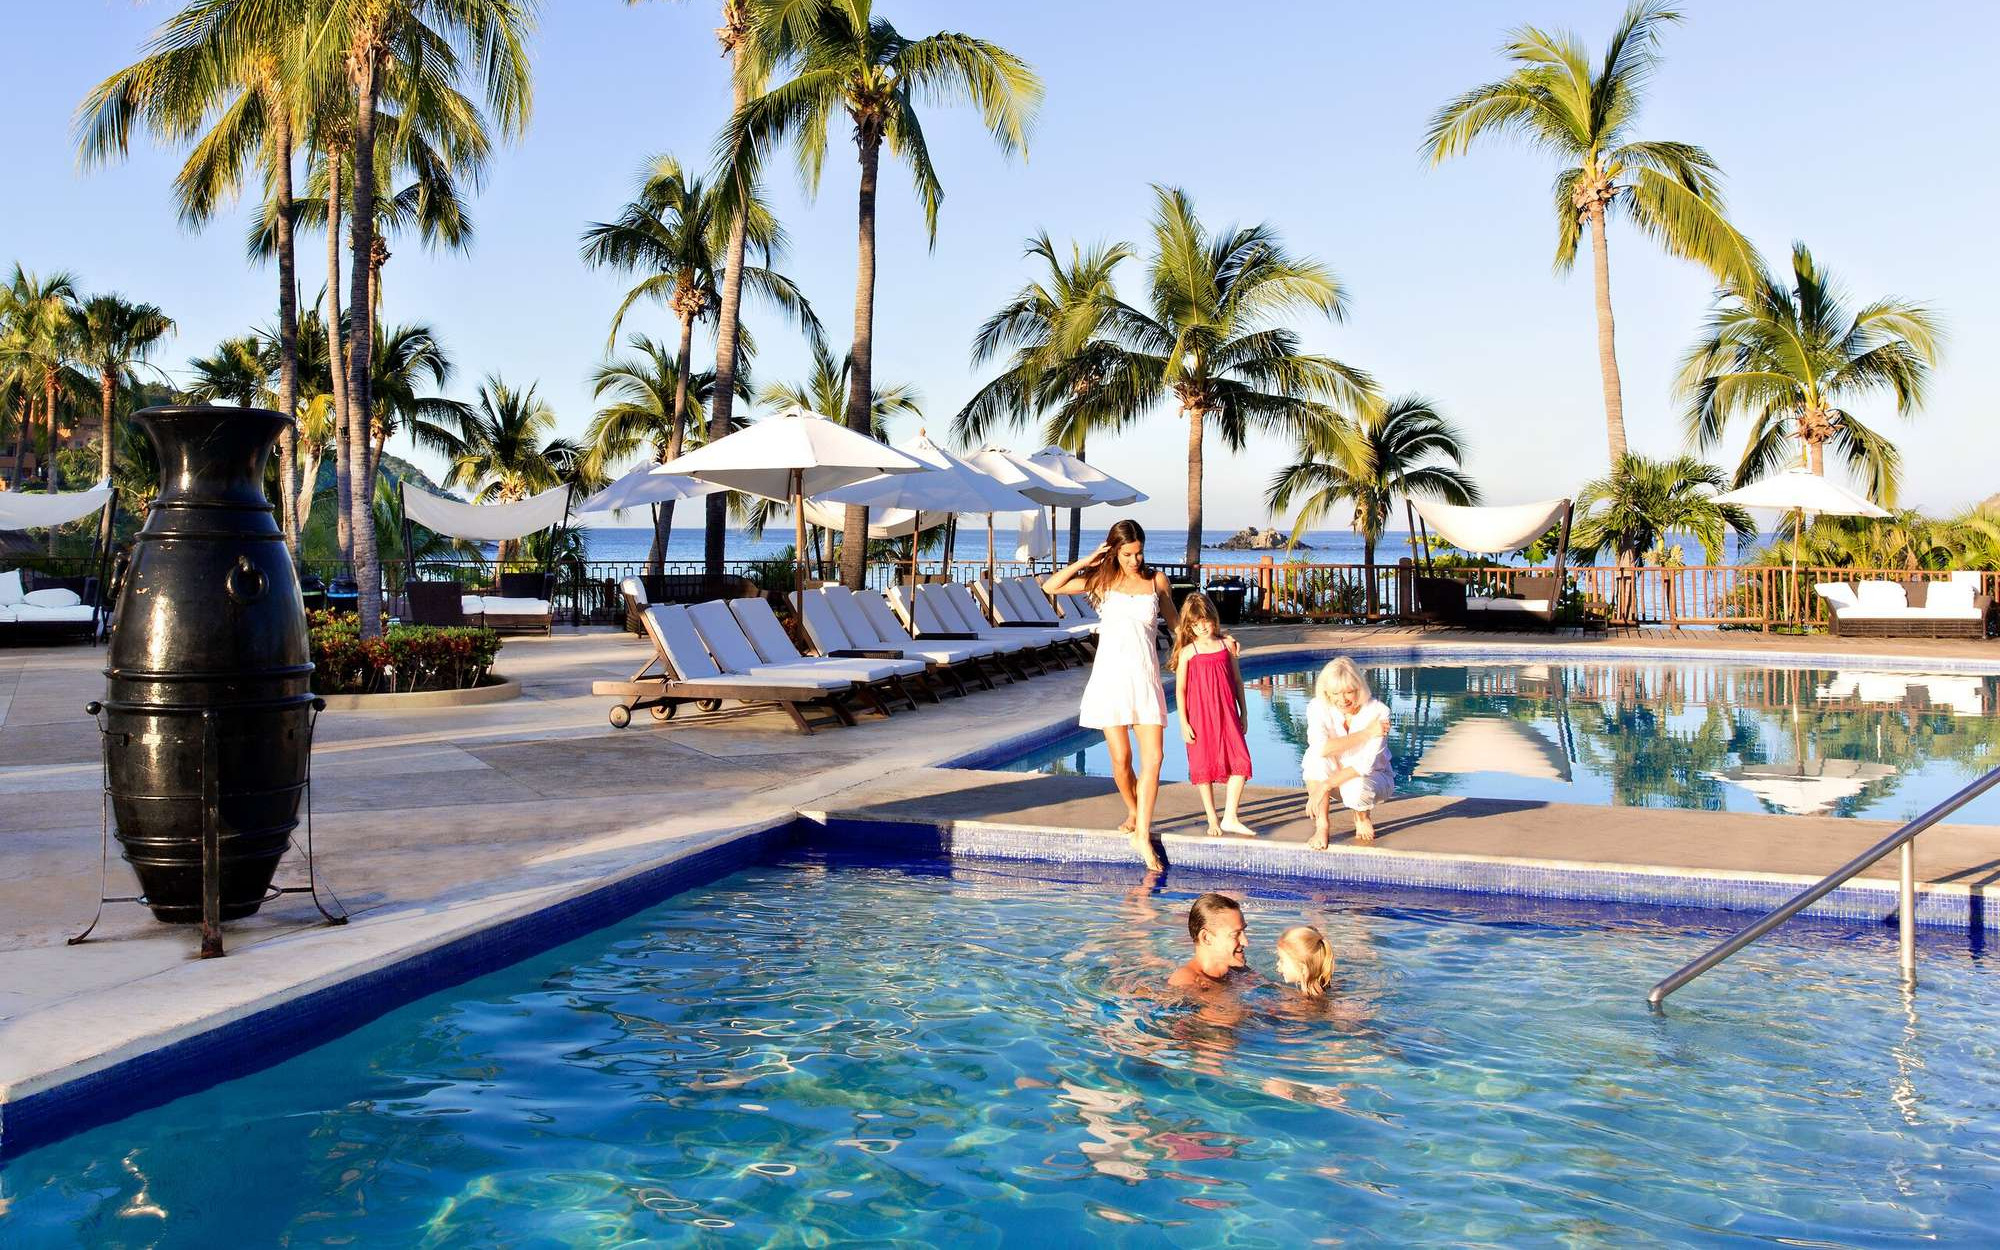 CLUB MED IXTAPA PACIFIC: Book at the best price